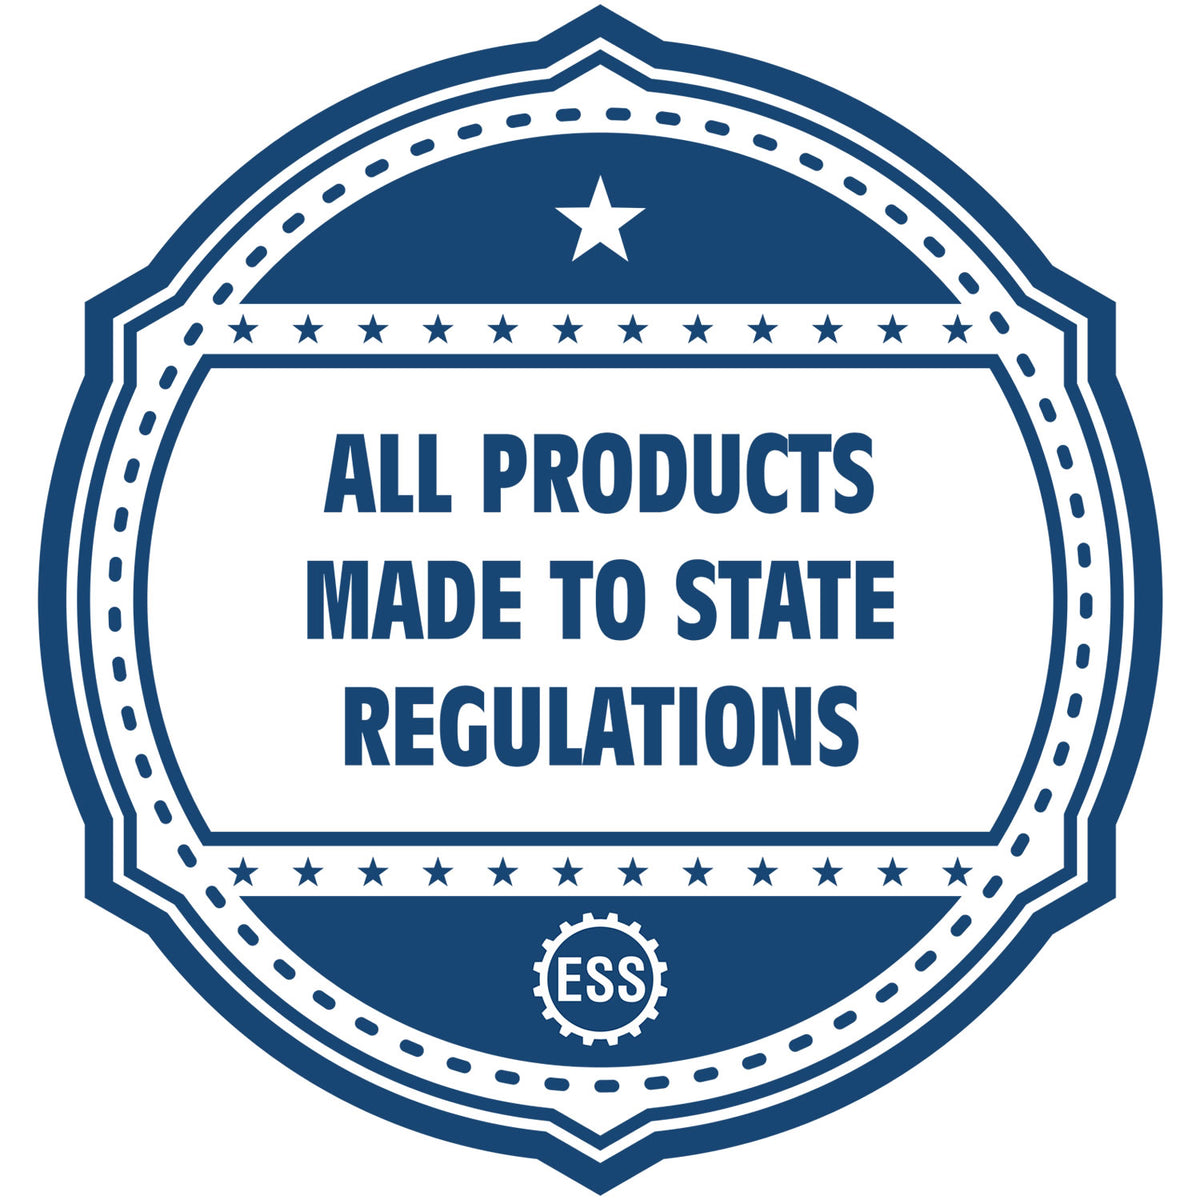 An icon or badge element for the Heavy-Duty Ohio Rectangular Notary Stamp showing that this product is made in compliance with state regulations.